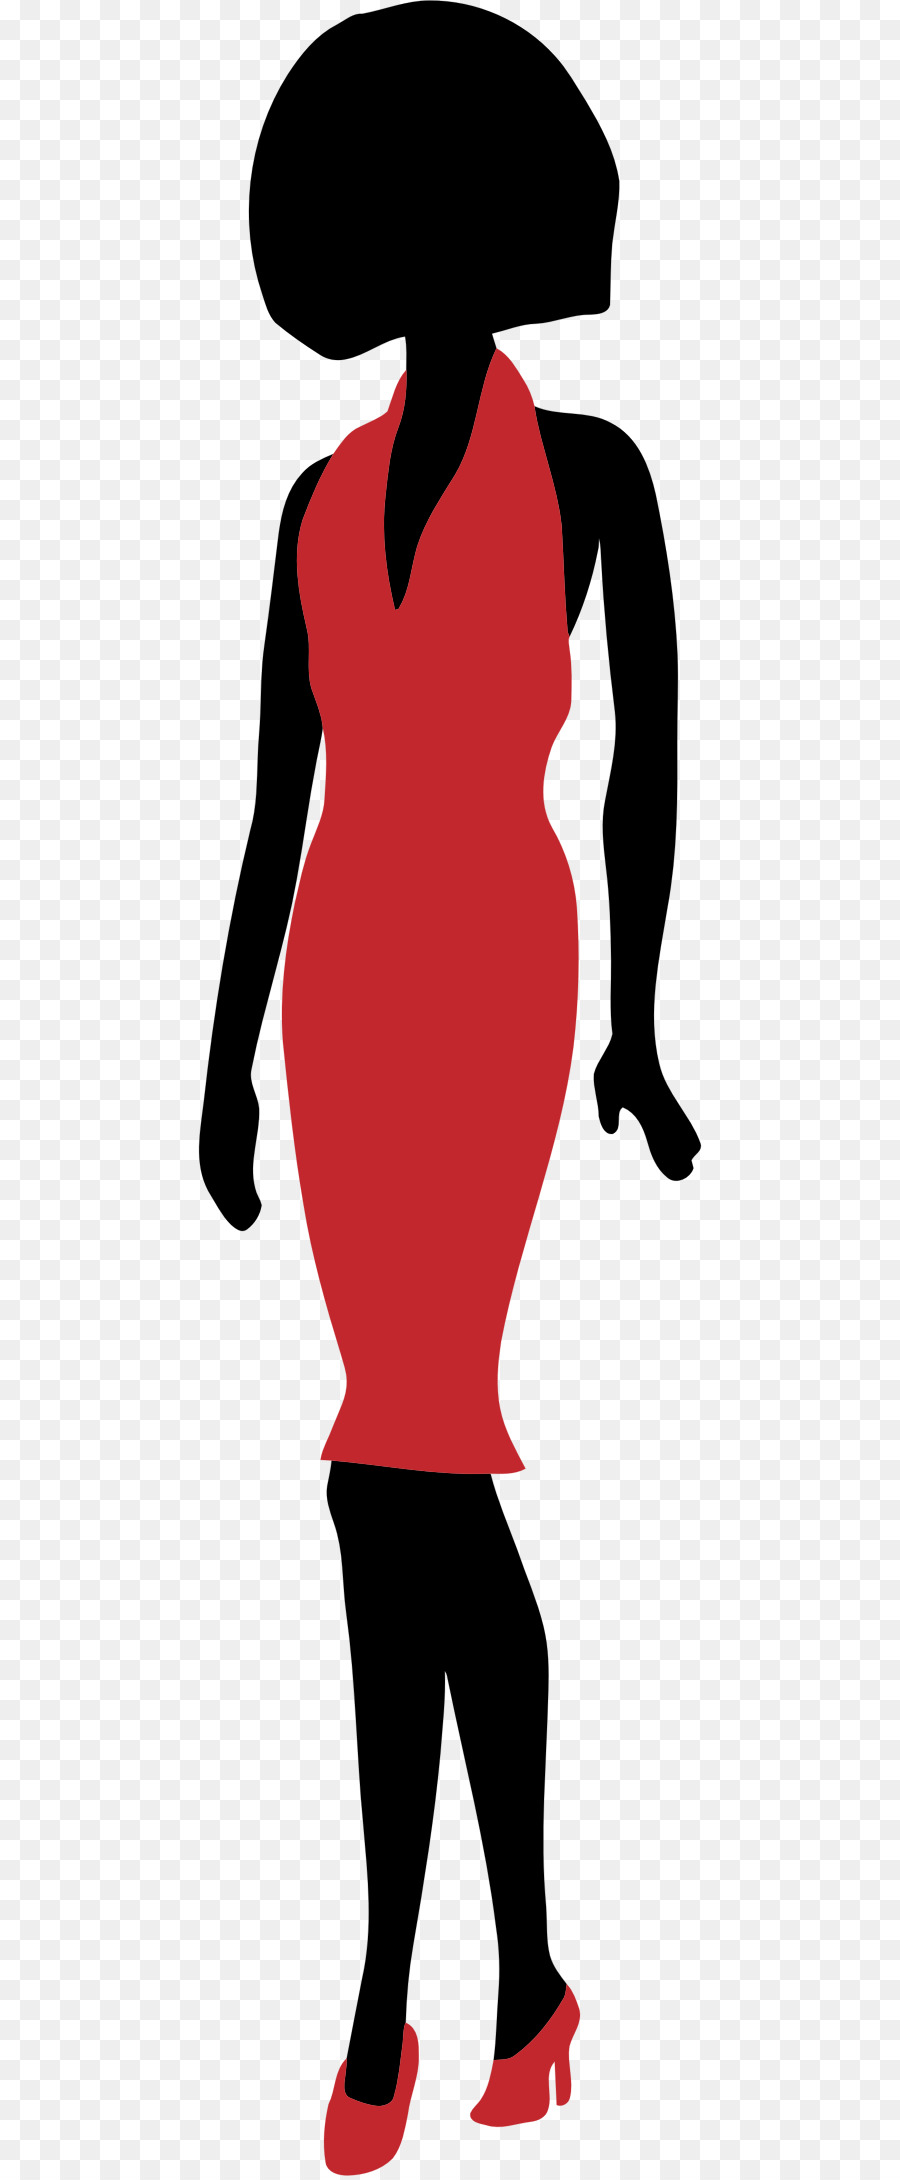 Silhouette Dress Woman - dresses png download - 504*2176 - Free Transparent  png Download.